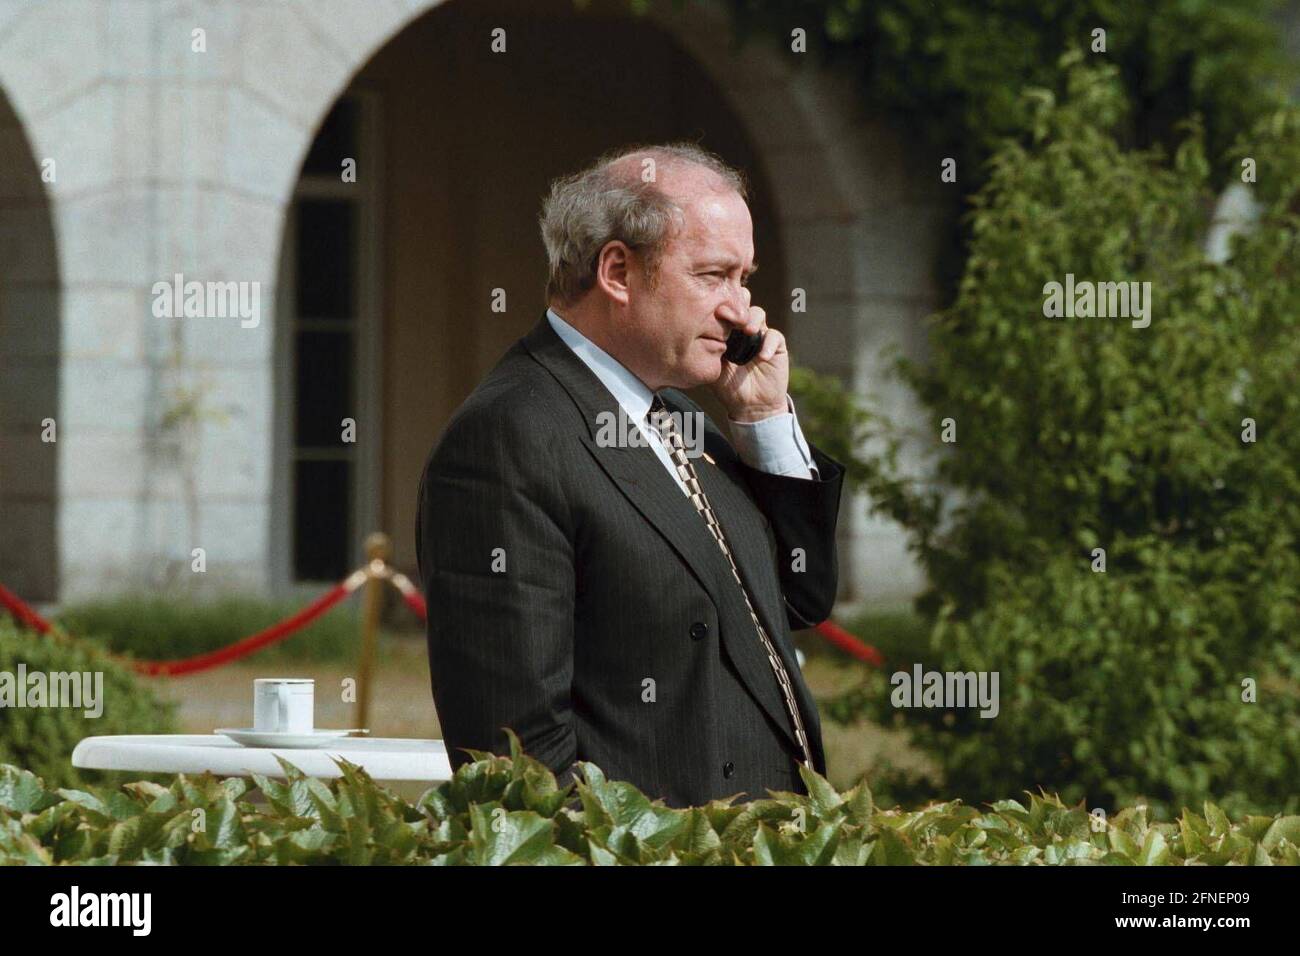 French Foreign Minister Hubert Vedrine, talks on the phone during the G-8 Foreign Ministers meeting on the terrace of the German government's guest house, Petersberg. [automated translation] Stock Photo